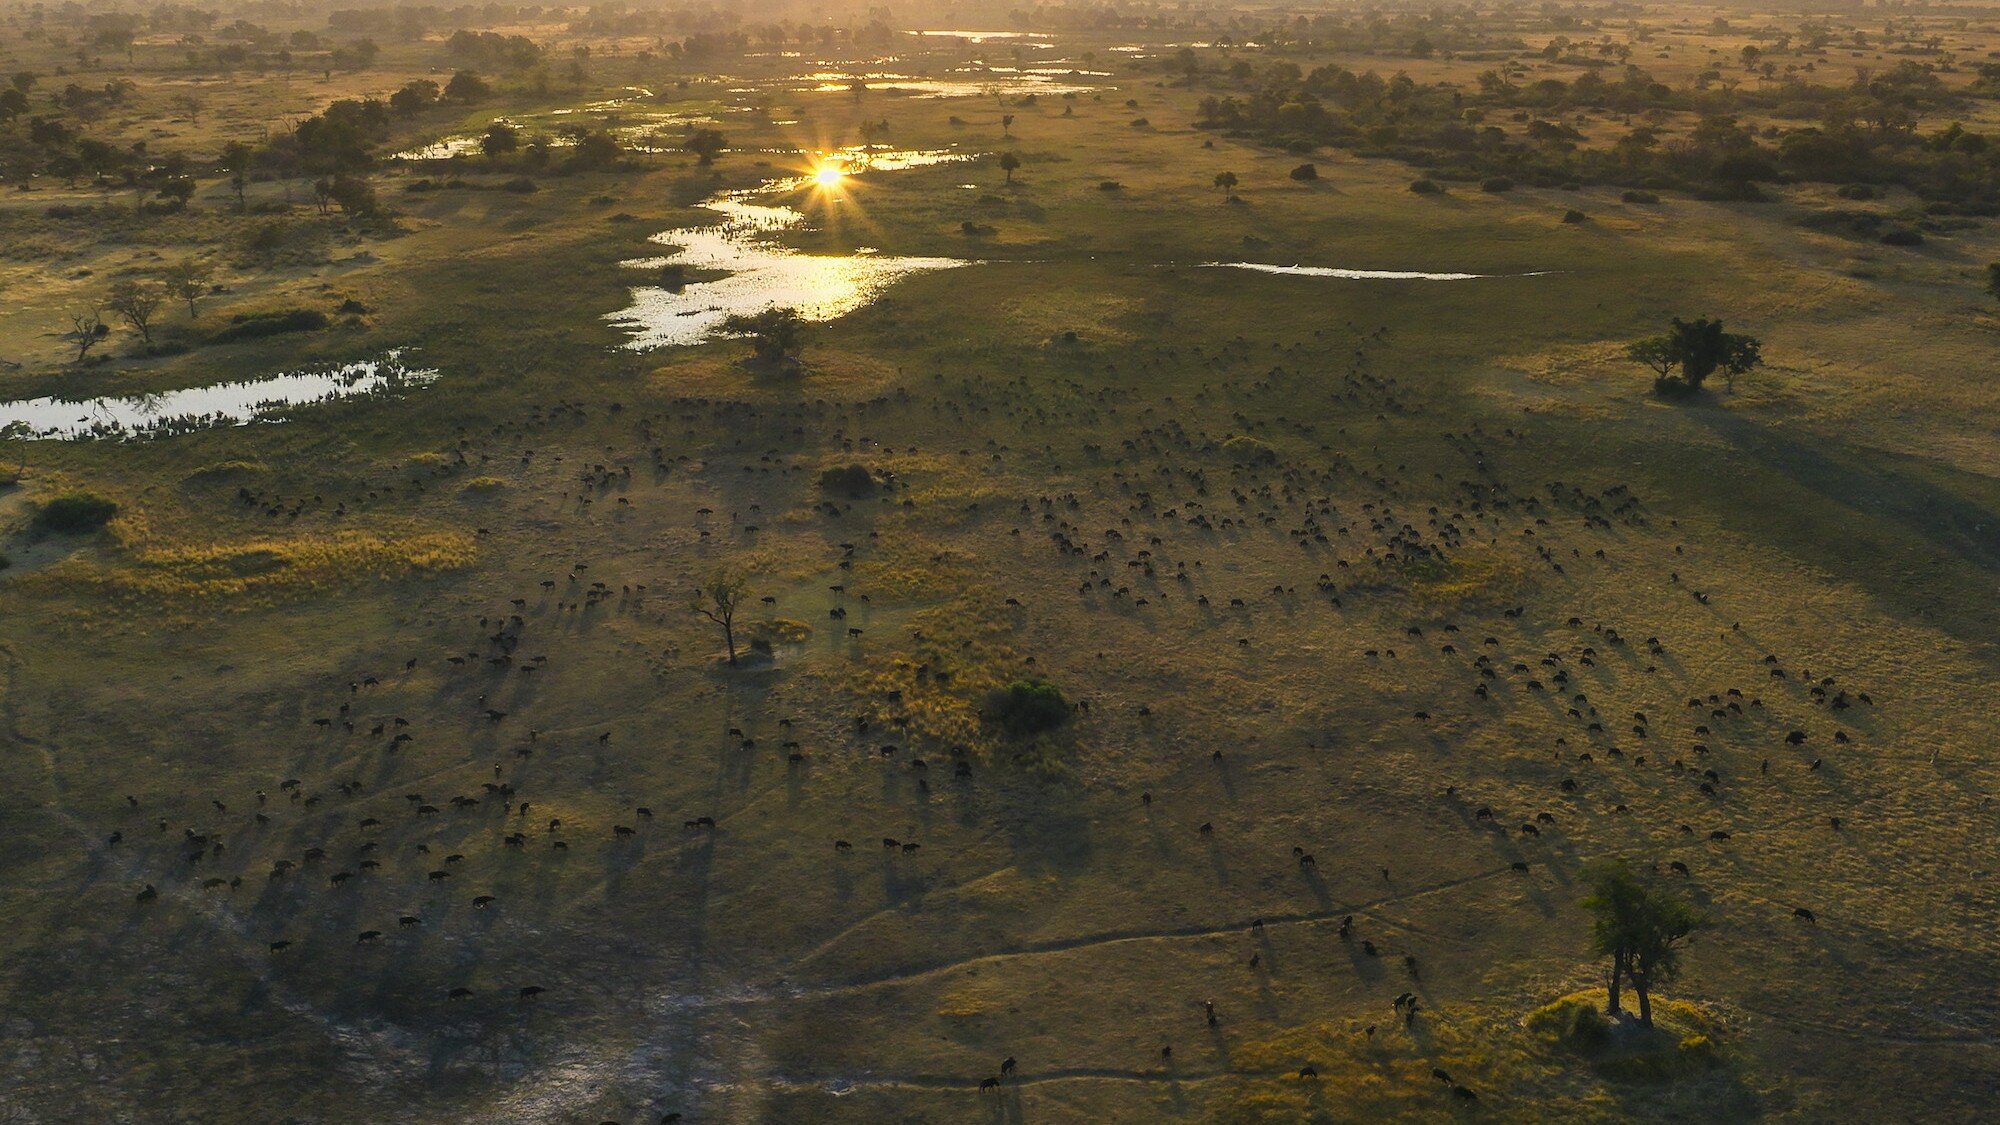 Aerial drone shot of plains full of cattle. (National Geographic for Disney+/Bertie Gregory)